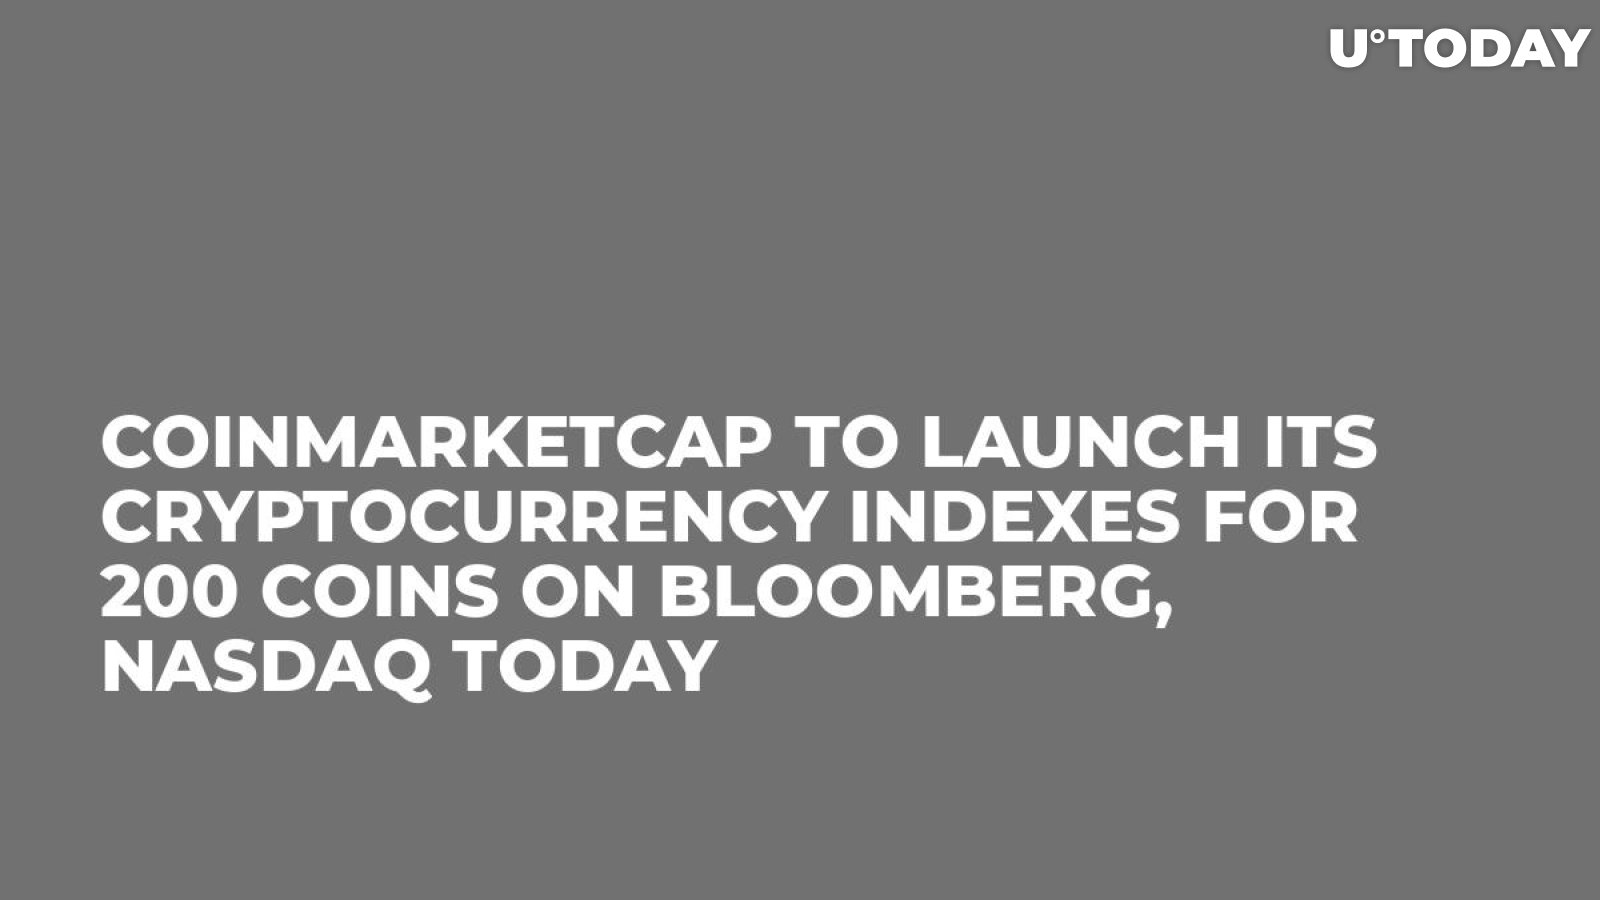 CoinMarketCap to Launch Its Cryptocurrency Indexes for 200 Coins on Bloomberg, NASDAQ Today